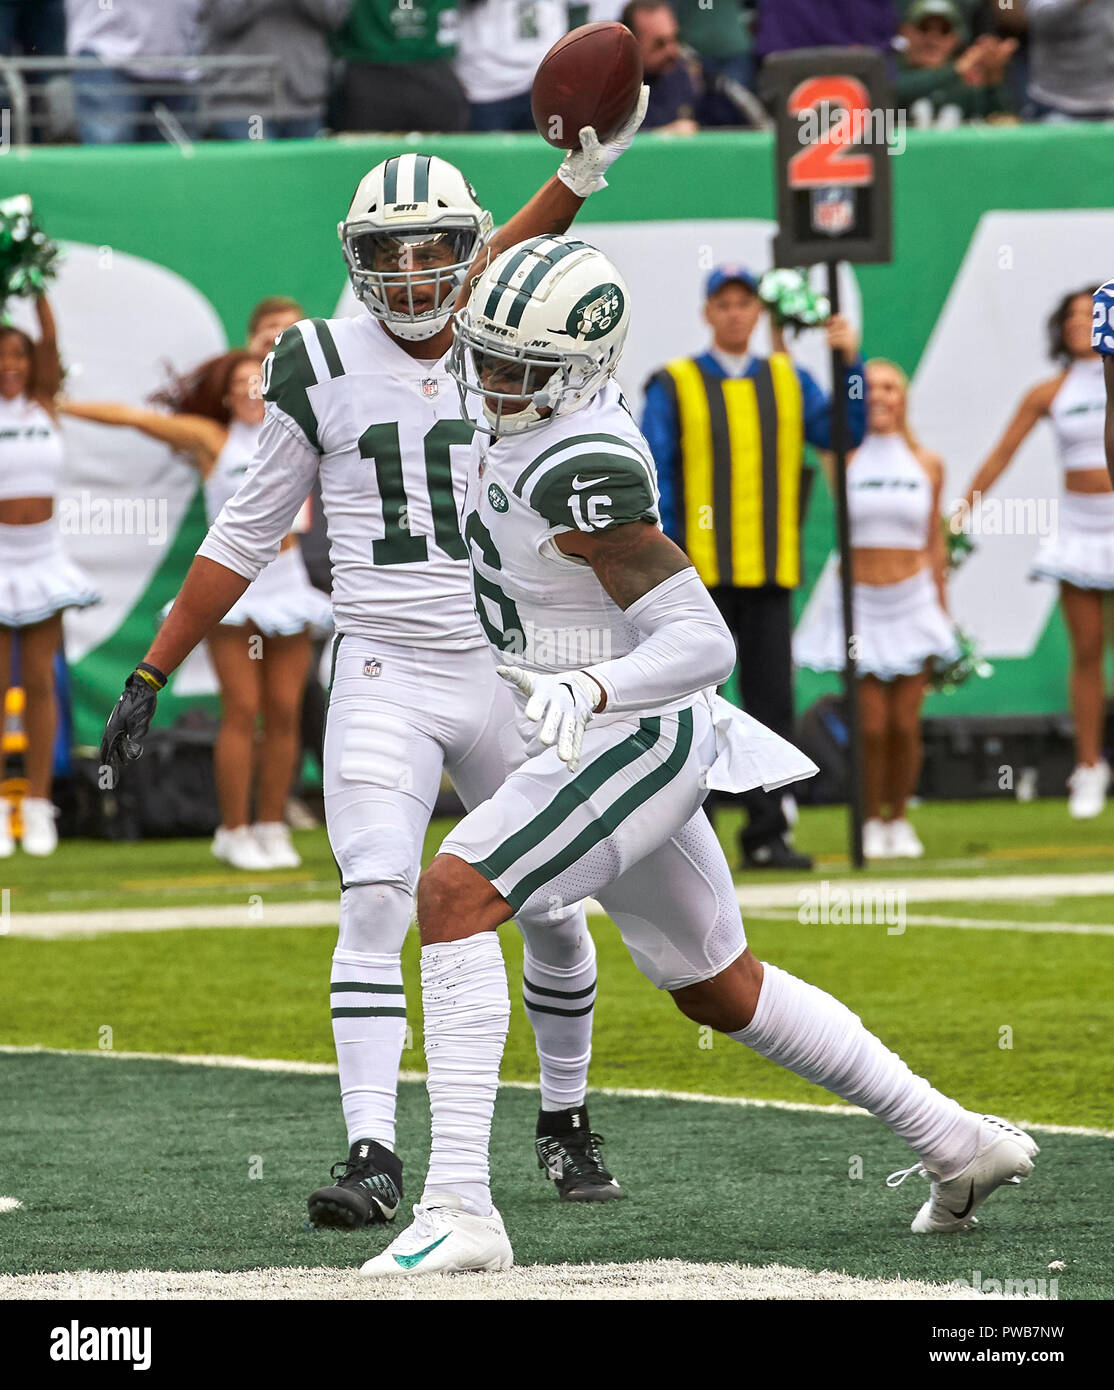 East Rutherford, New Jersey, USA. 14th Oct, 2018. New York Jets wide  receiver Terrelle Pryor (16) spikes the ball in the end zone after scoring  a touchdown during a NFL game between